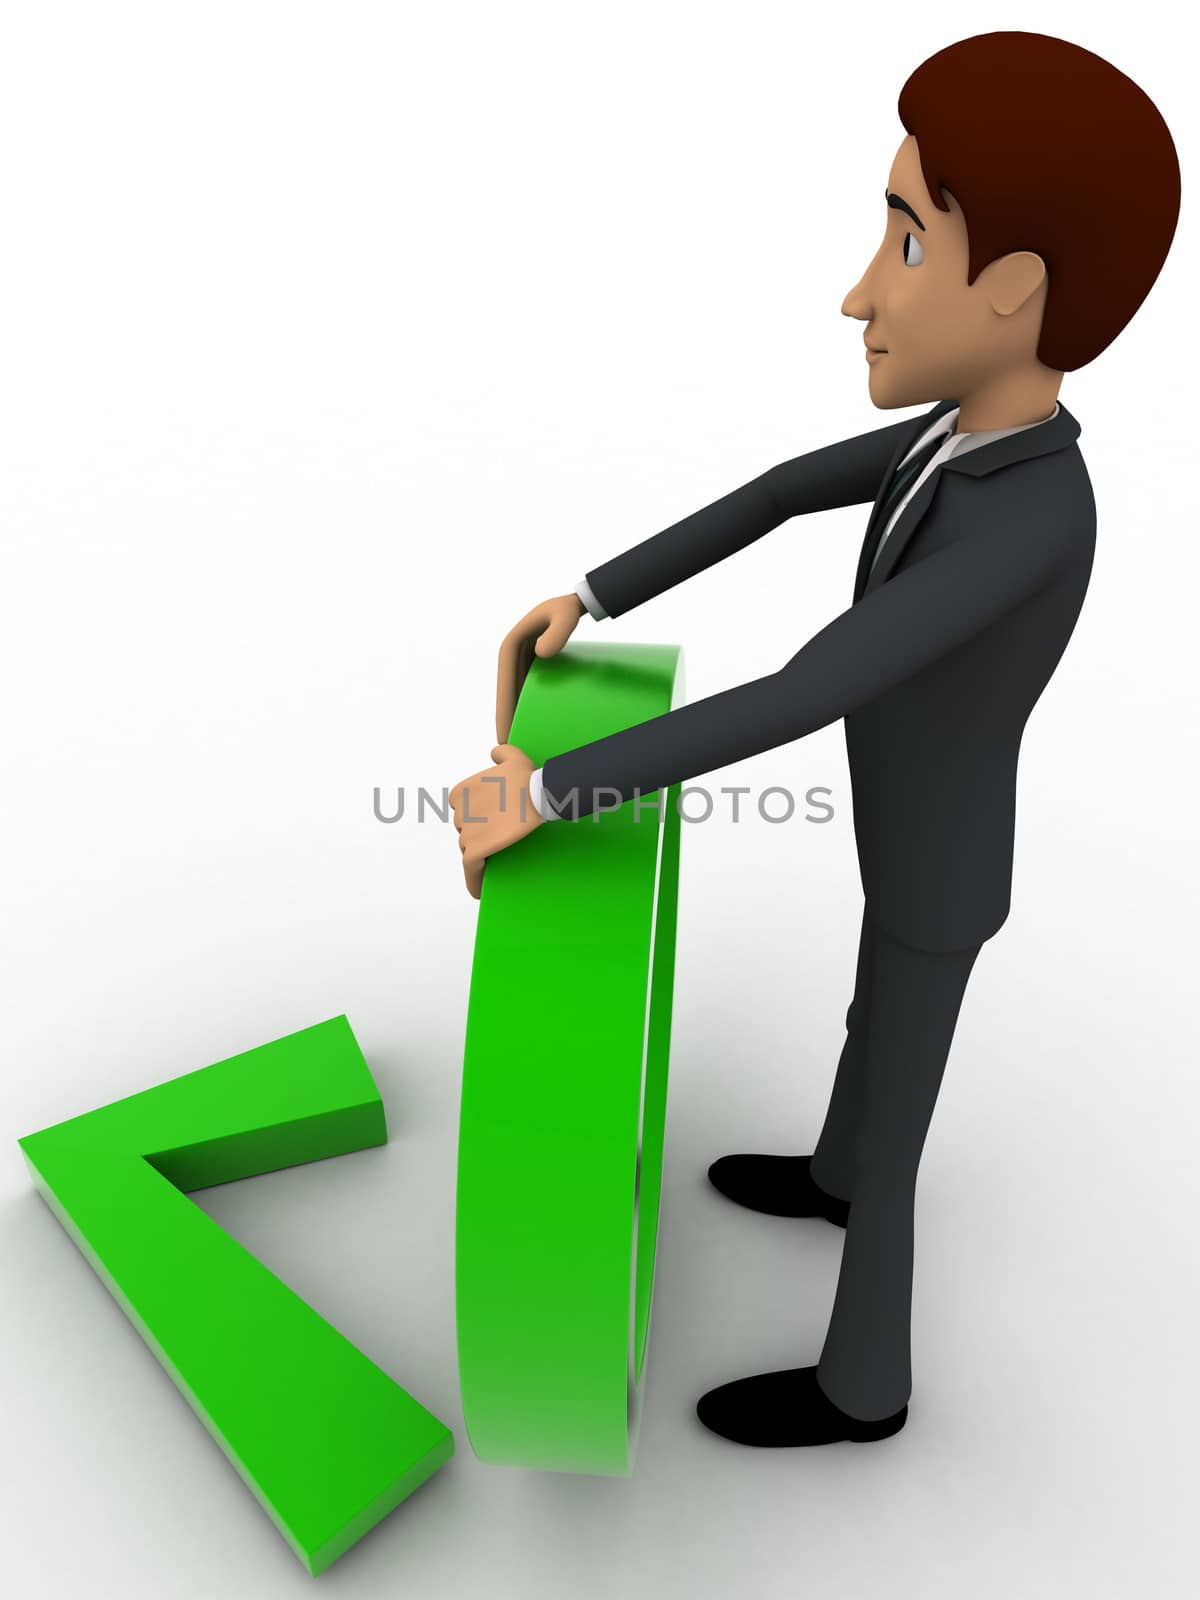 3d man holding circle and green right symbol concept on white backgorund, side angle view